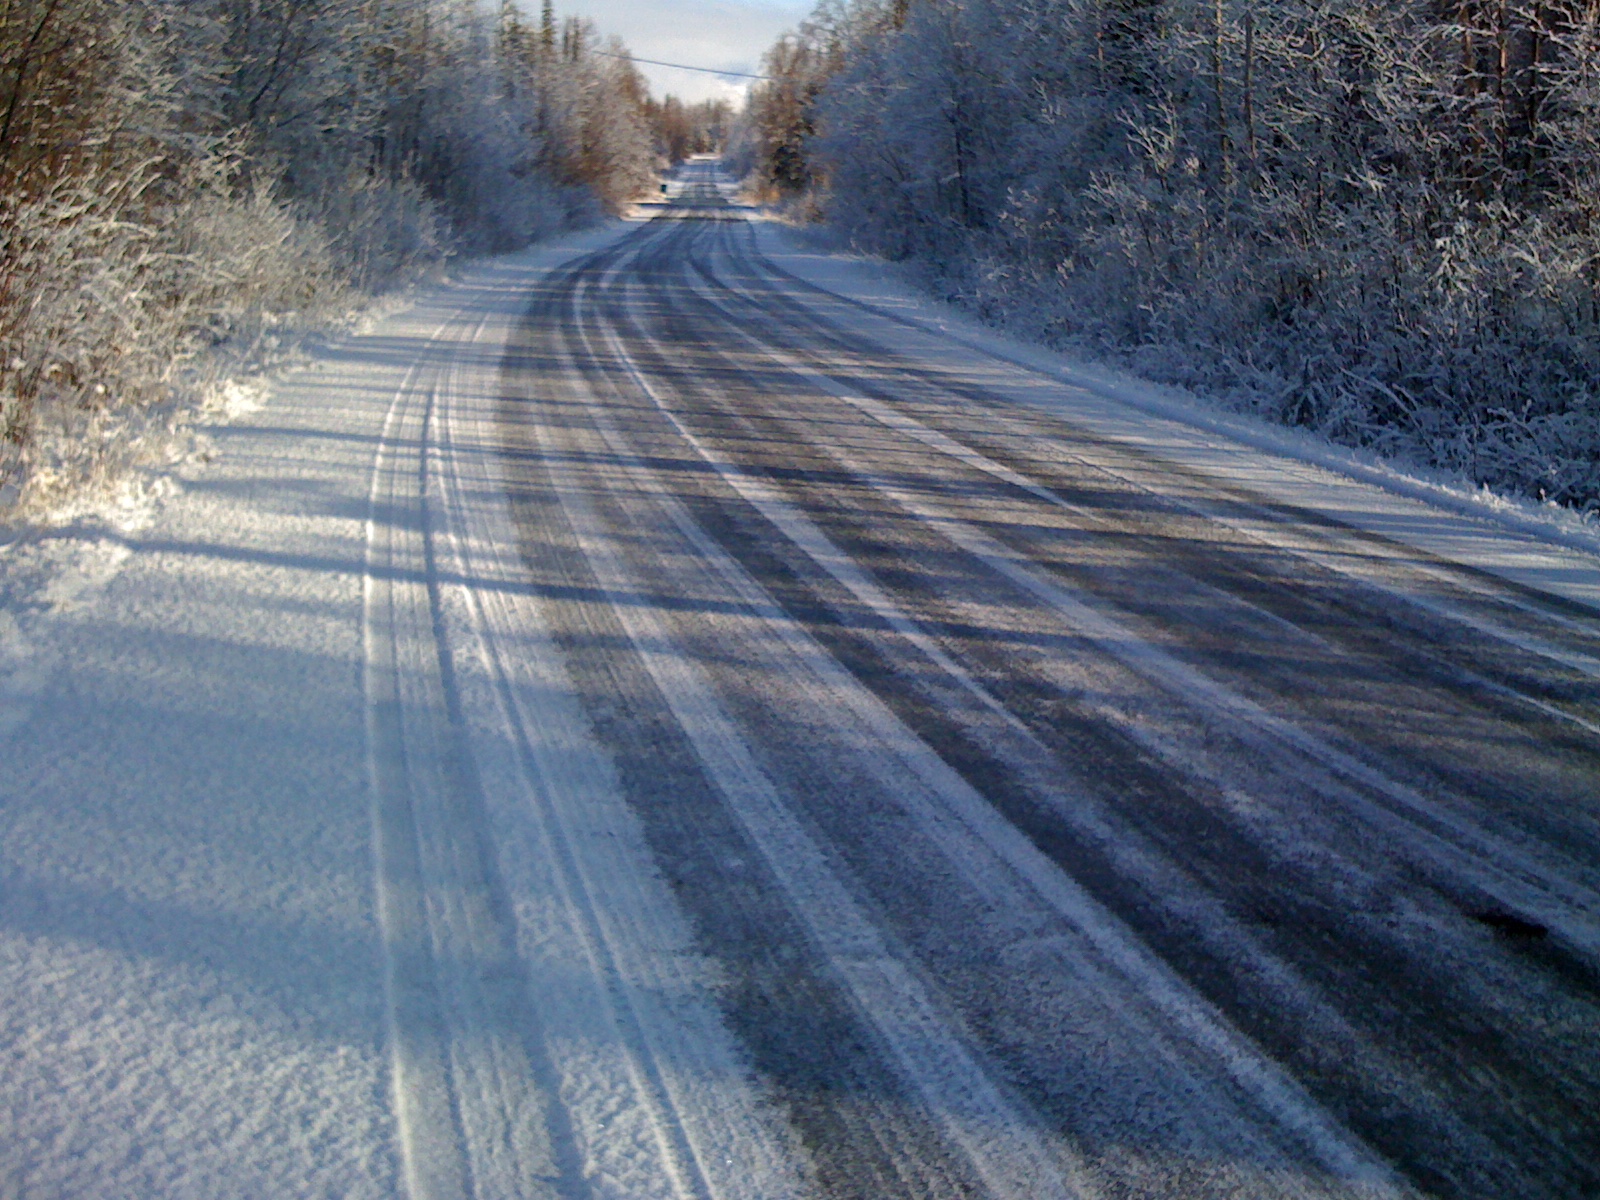 Wasilla, Alaska side roads - Ice and snow for the winter.